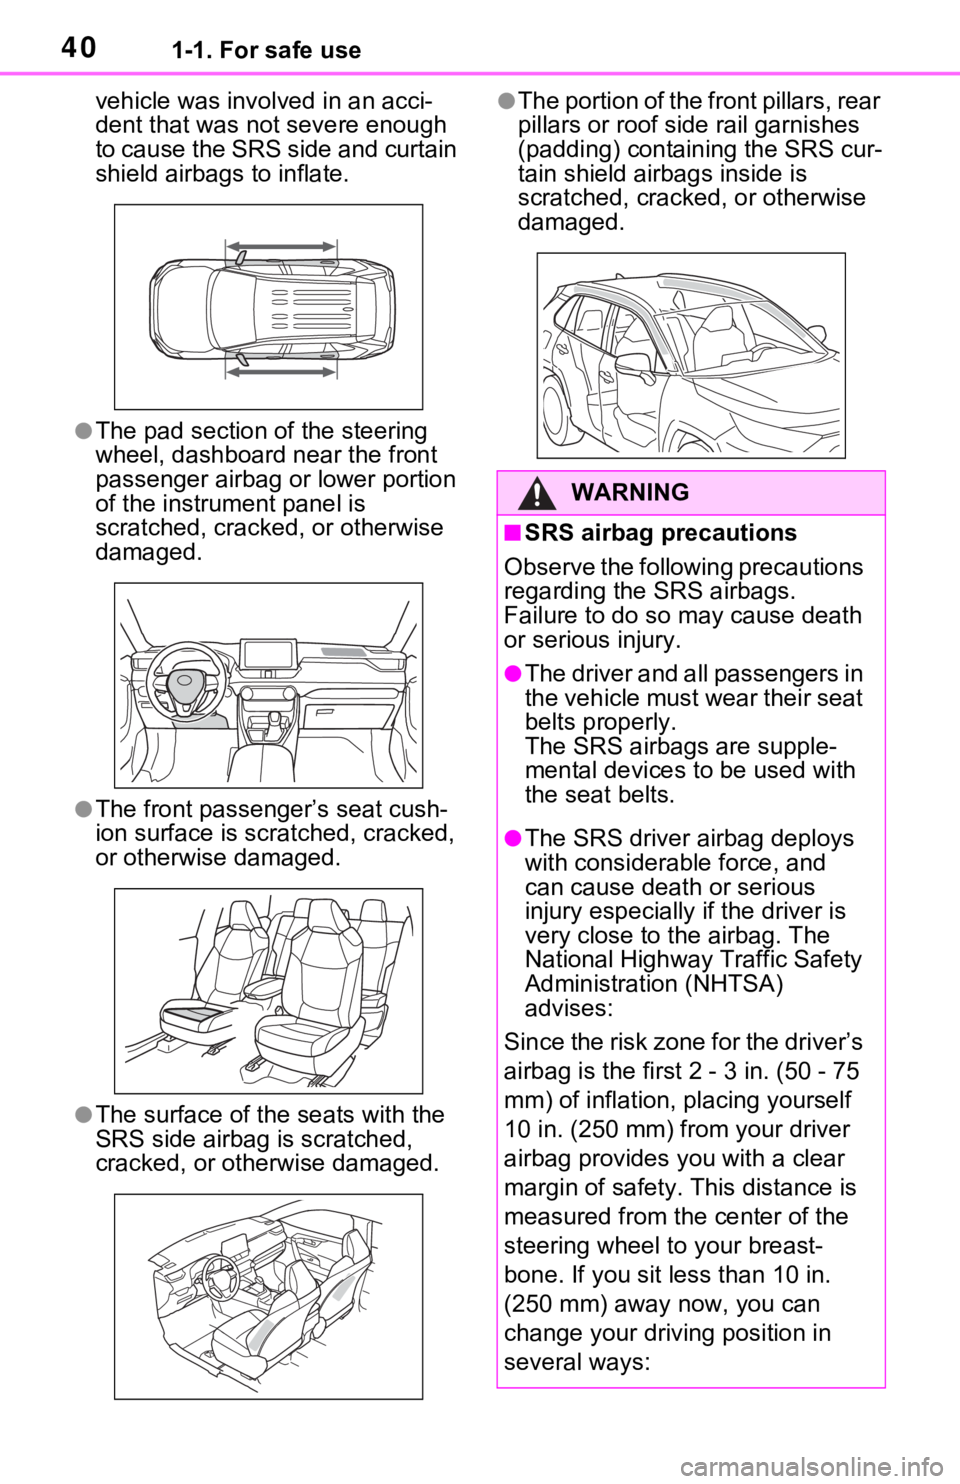 TOYOTA RAV4 HYBRID 2021  Owners Manual 401-1. For safe use
vehicle was involved in an acci-
dent that was not severe enough 
to cause the SRS side and curtain 
shield airbags to inflate.
●The pad section of the steering 
wheel, dashboard